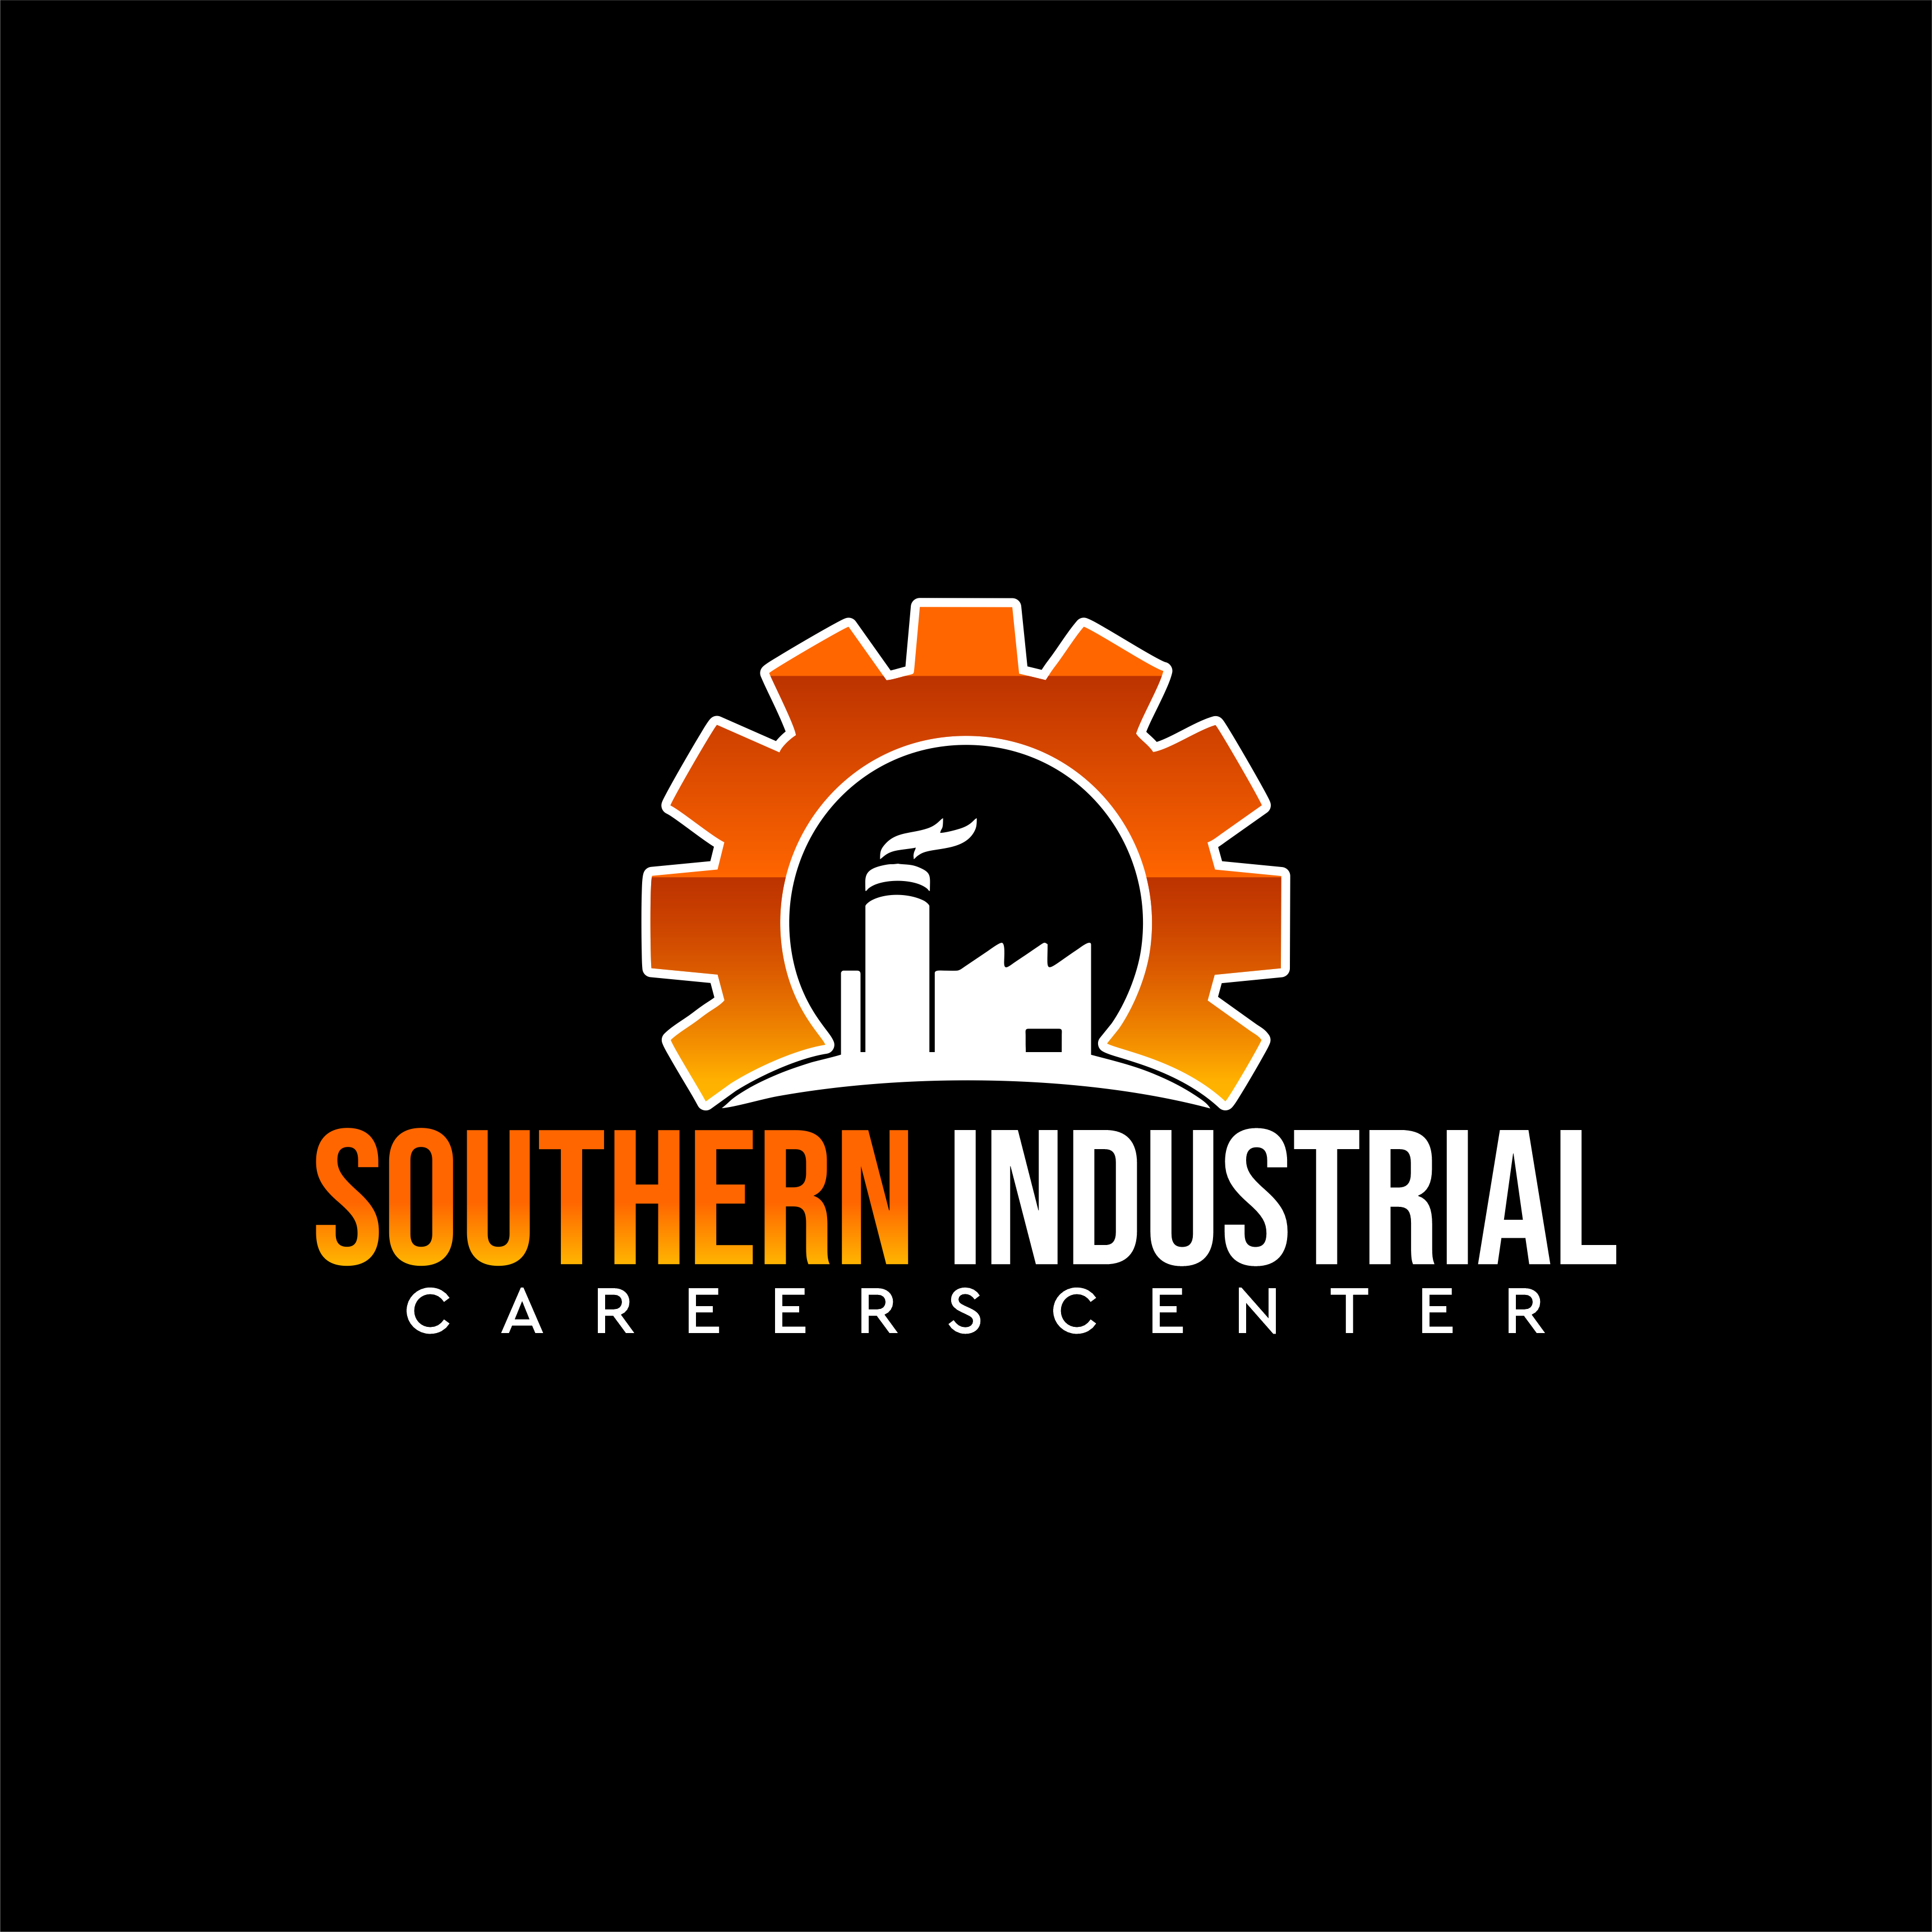 Southern Industrial Careers Center, Wednesday, January 6, 2021, Press release picture